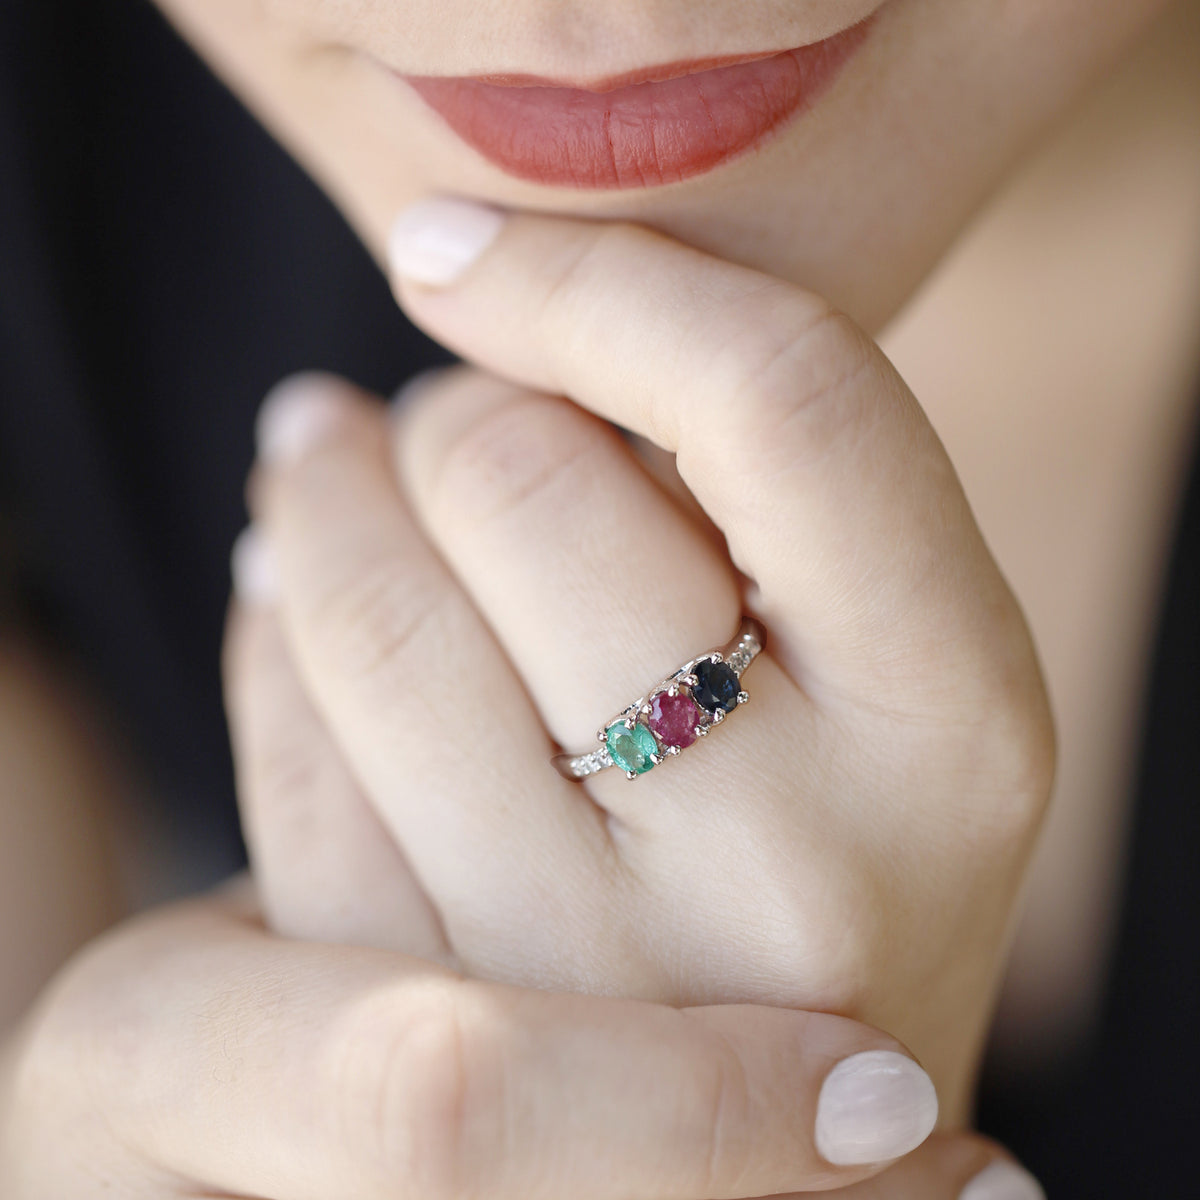 Silver Ring with Emerald Ruby Sapphire and Diamonds, silver ring, sterling silver ring, sapphire ring, diamond ring, emerald ring, 3 color ring, 3 stone ring, chic ring, fashionable ring, stylish ring